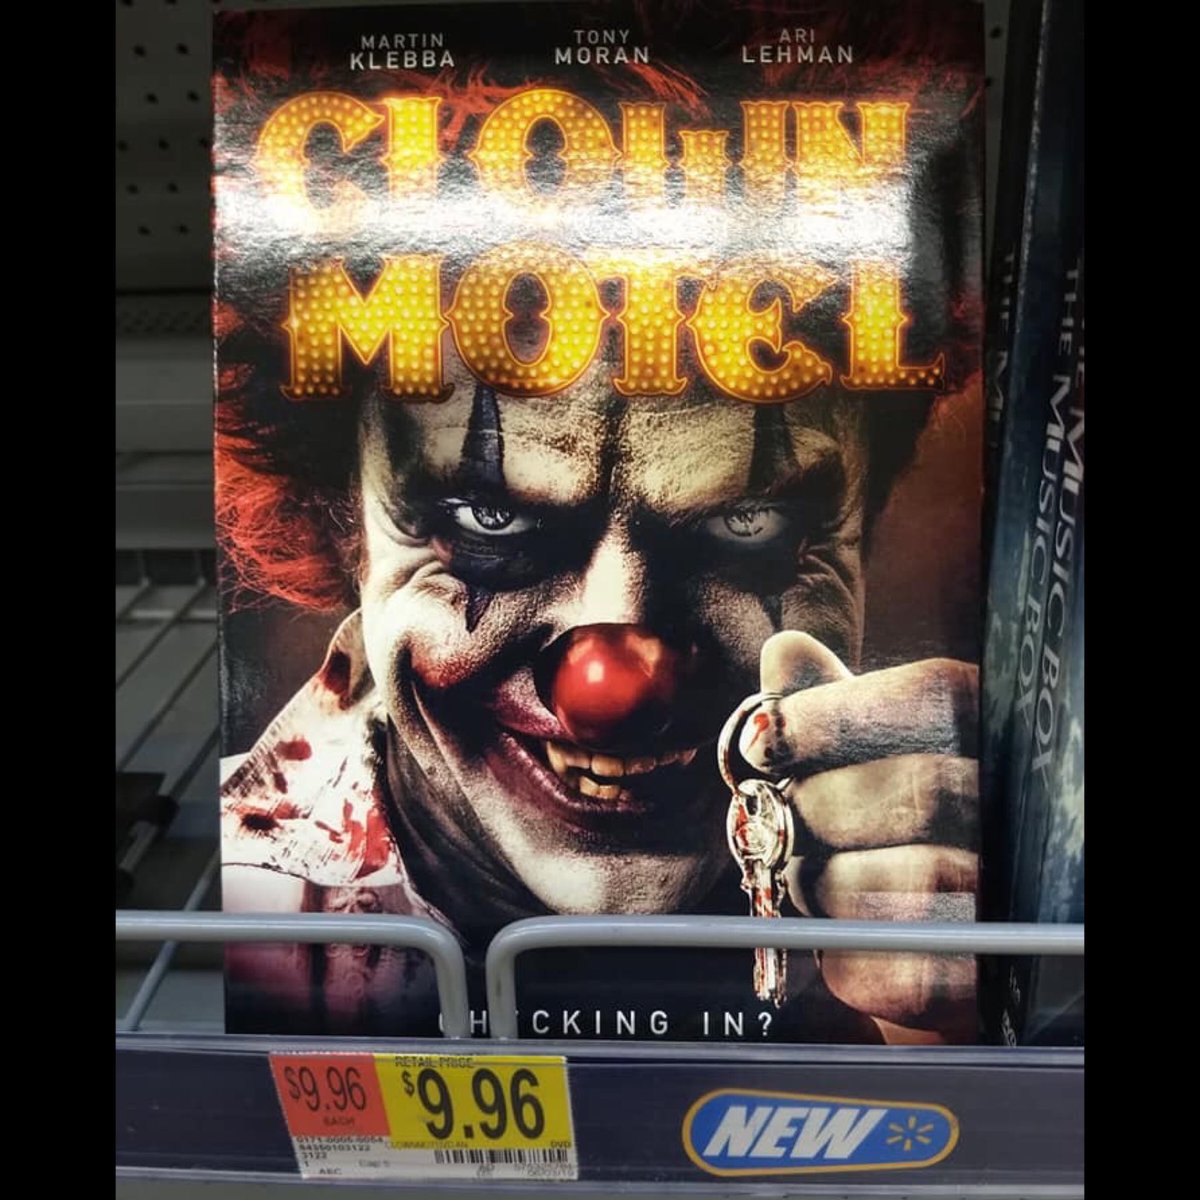 “CLOWN MOTEL” AVAILABLE AT WALMART!!!
I PLAY PSYCAN THE CLOWN IN THIS INDIE HORROR THRILL RIDE!!! GET YOURS TODAY 🎬 #horroractor #indiehorrorfilm #walmart #jasonvoorhees #campcrystallake #horroricon